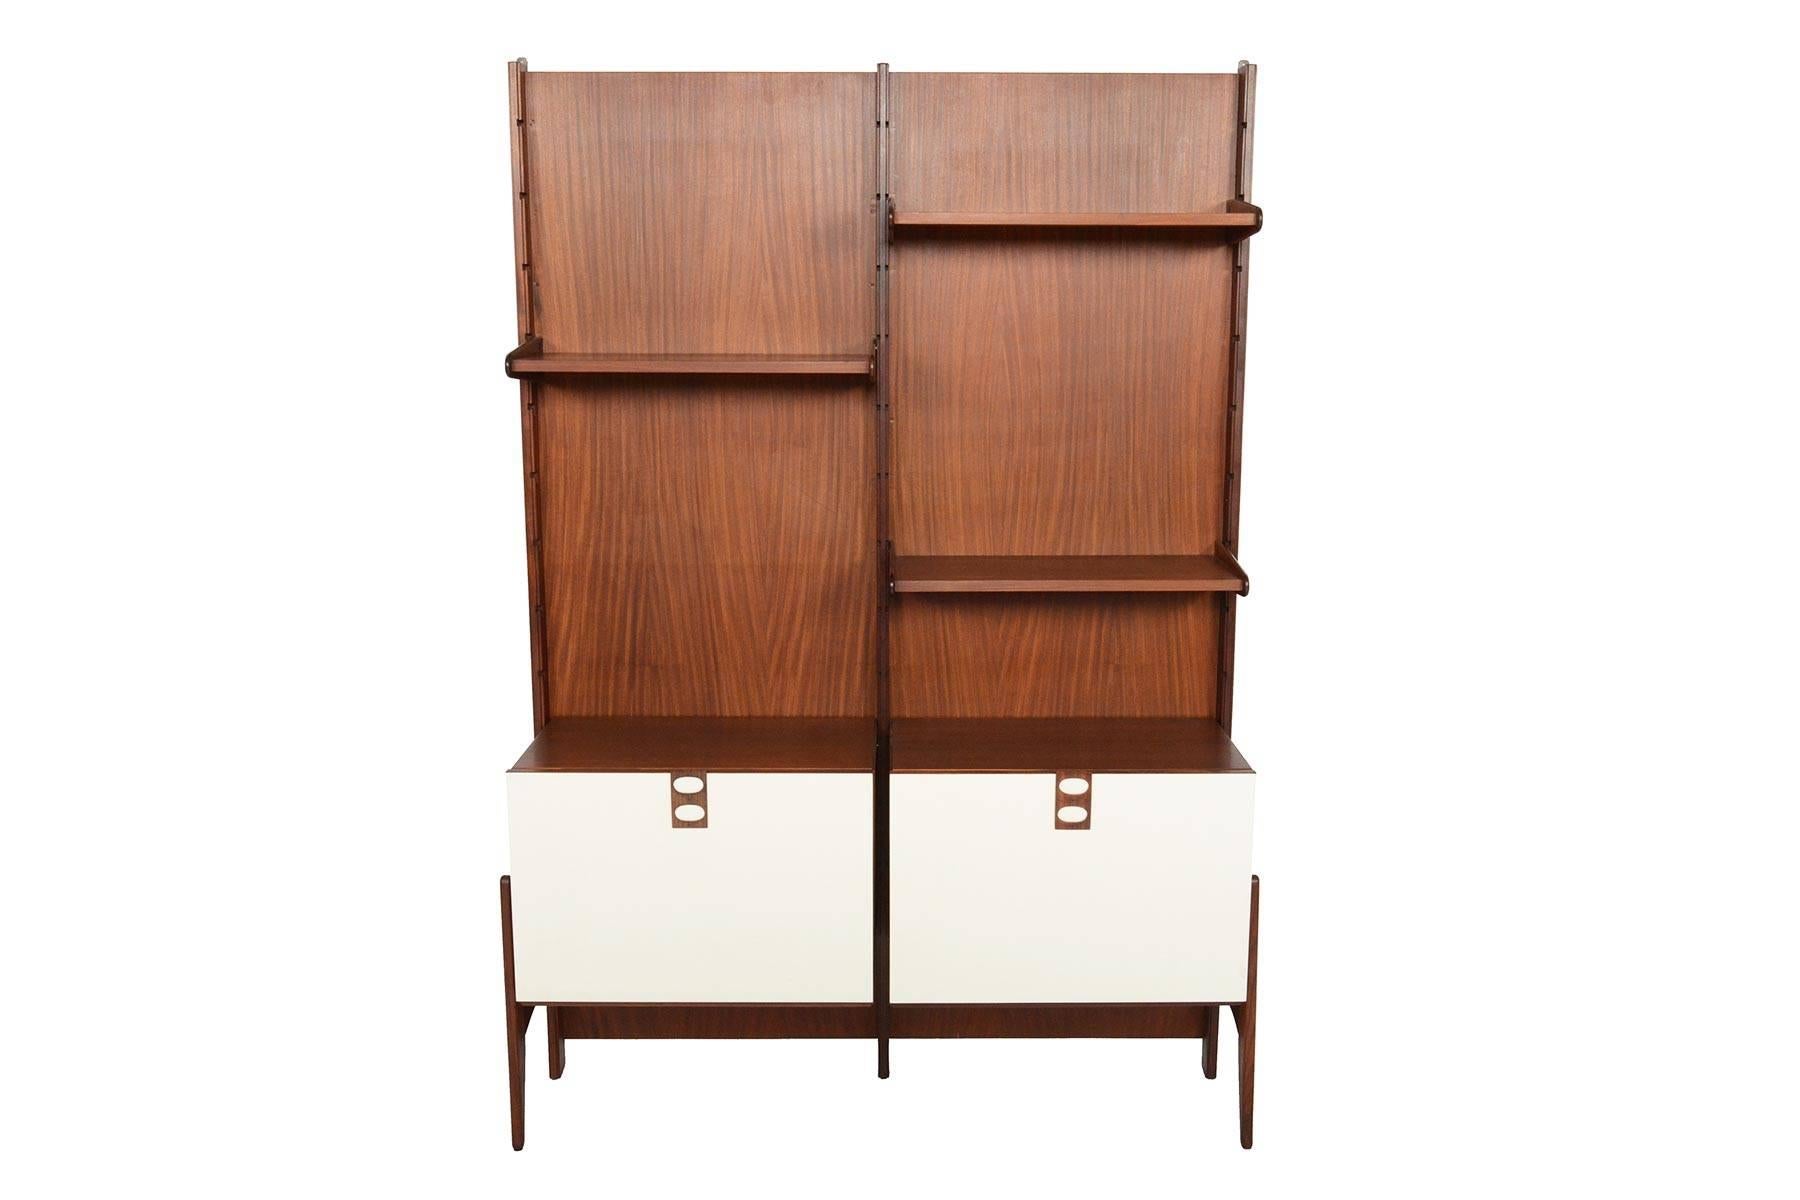 This handsome Mid-Century Modern Italian wall unit offers dynamic storage solutions in a small footprint! The two bay system is paneled in mahogany and includes three shelves and two cases that are completely modular. The unit stands on exterior